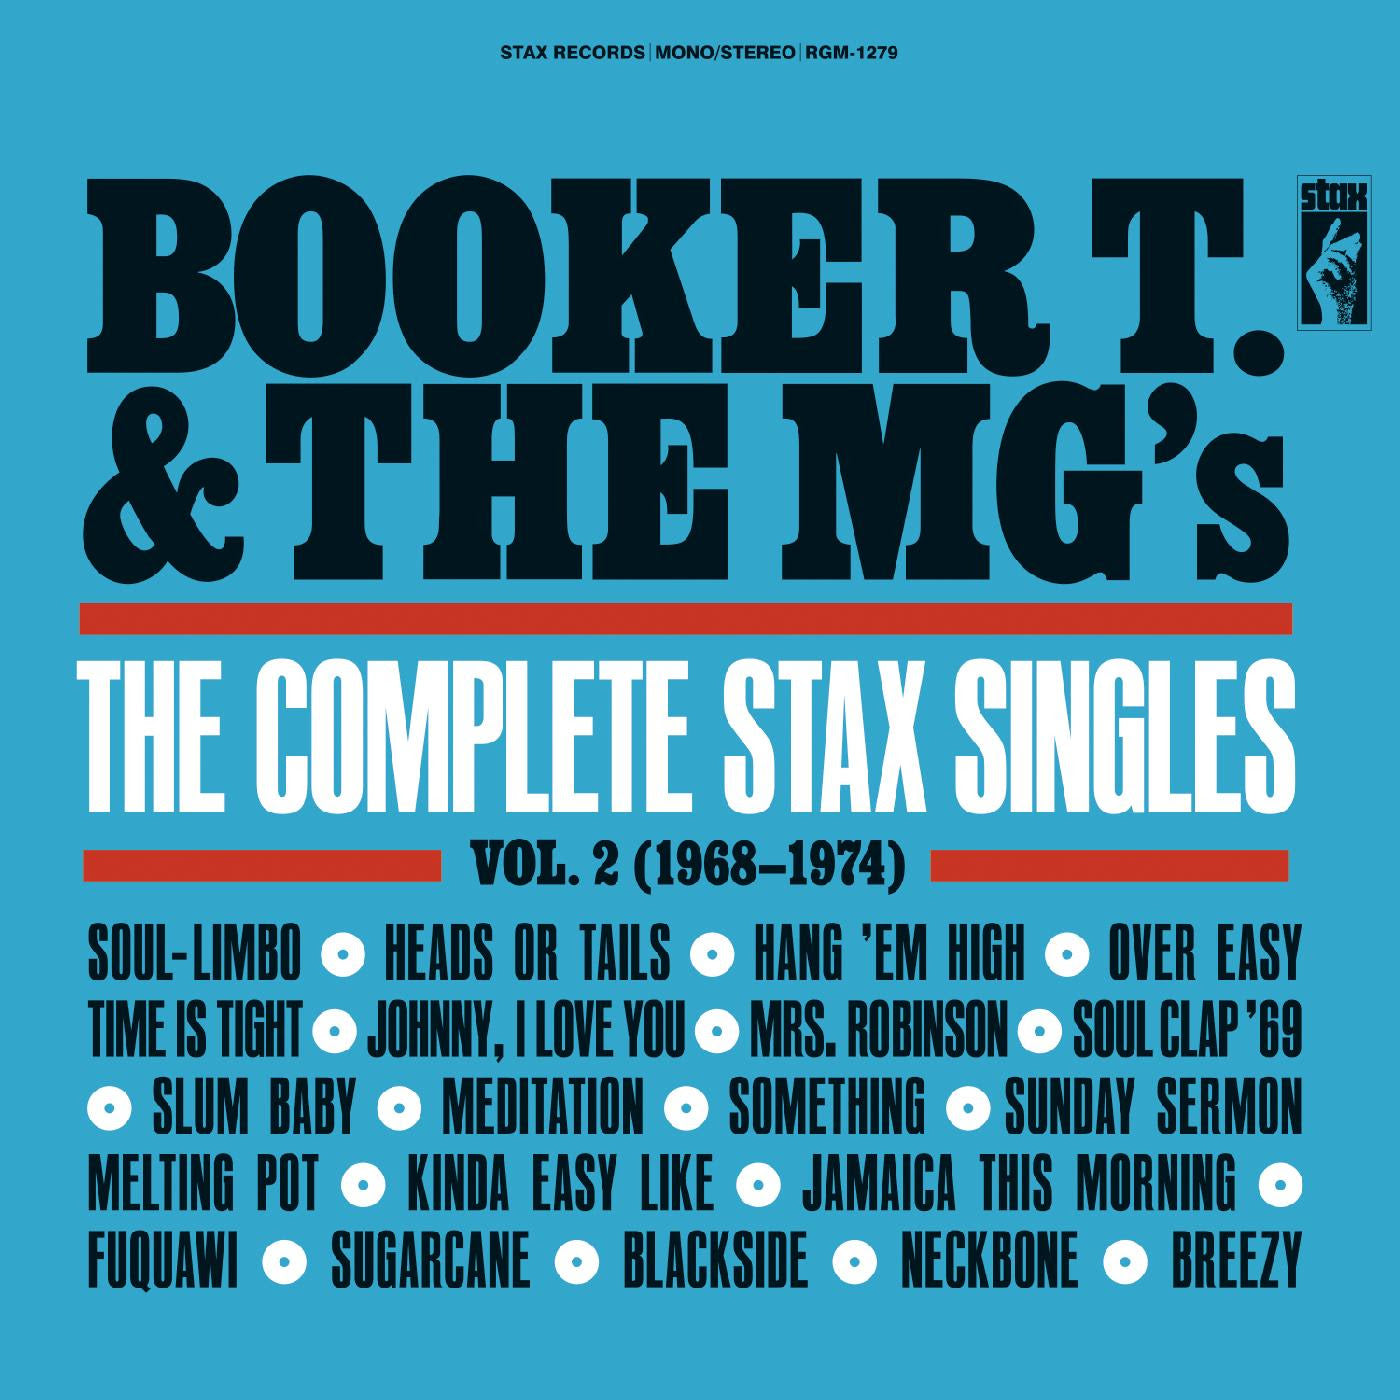 Booker T. & the MG's | The Complete Stax Singles Vol. 2 (1968-1974) | Vinyl